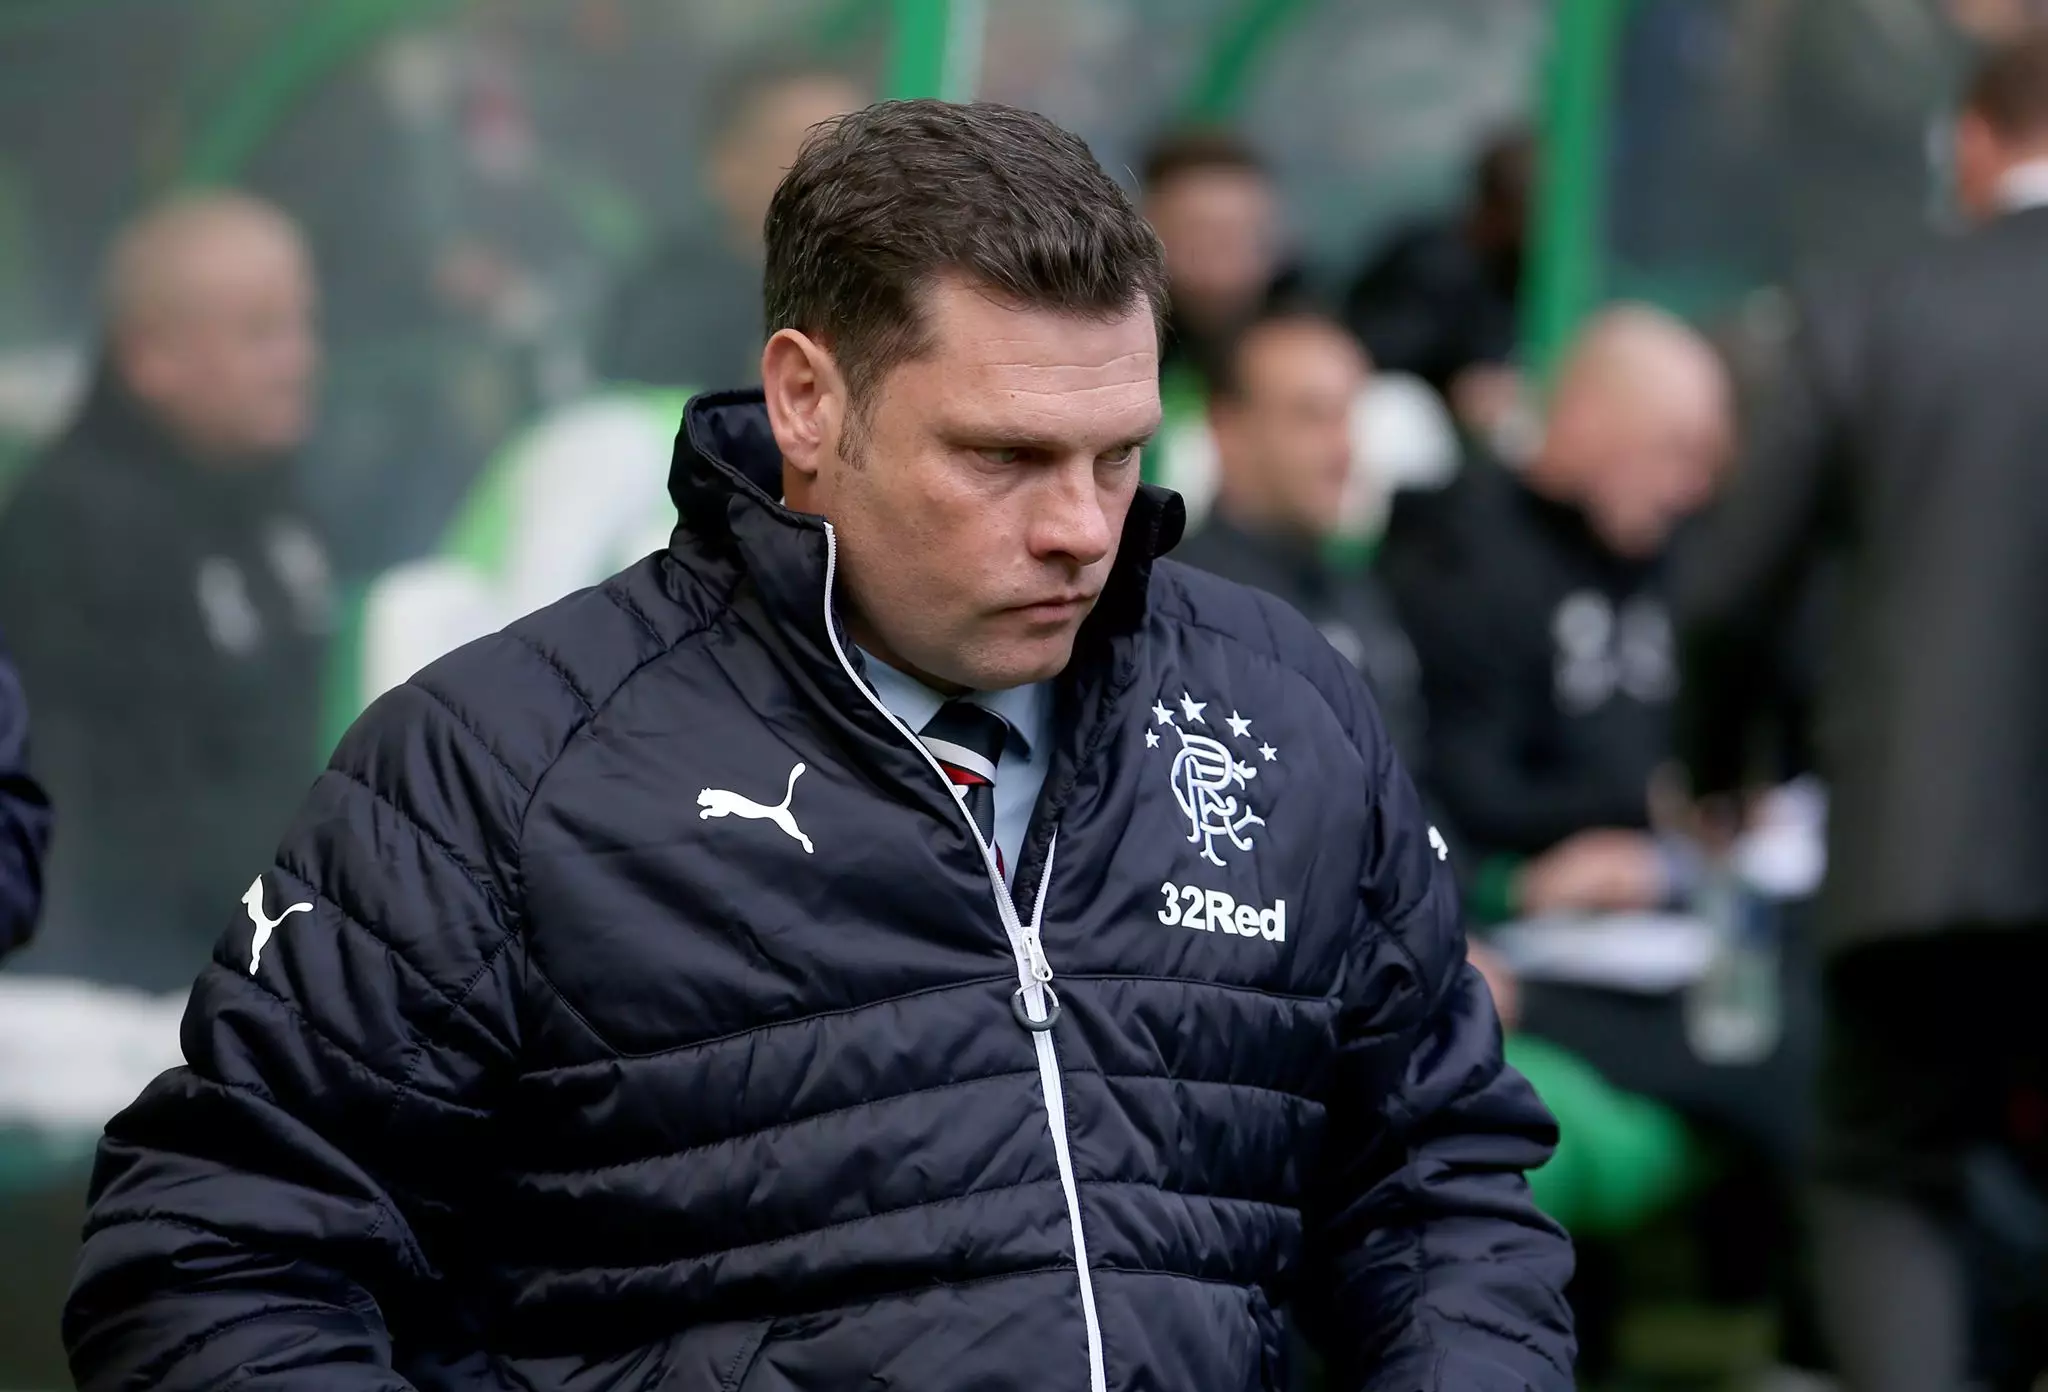 Murty was sacked earlier this week. Image: PA Images